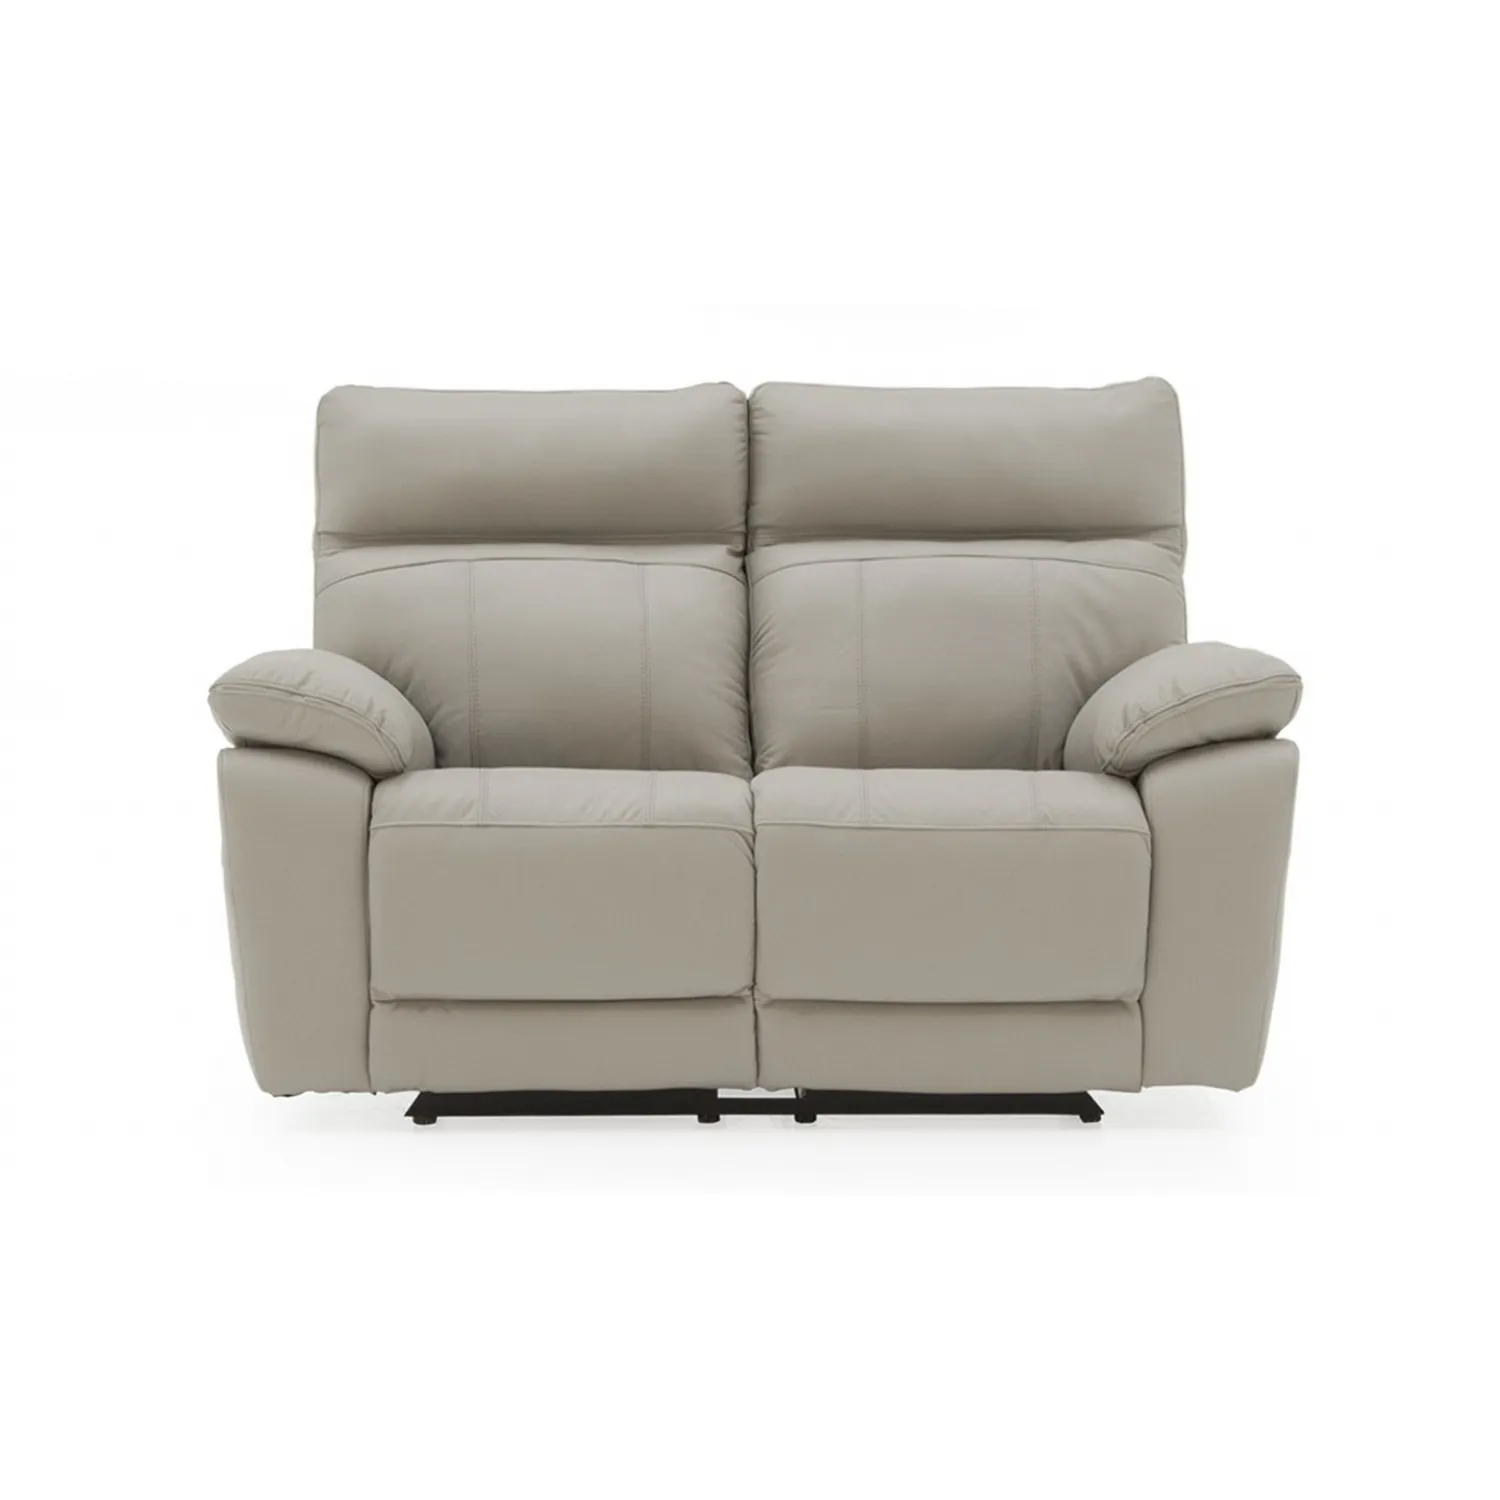 Light Grey Leather 2 Seater Manual Recliner Sofa